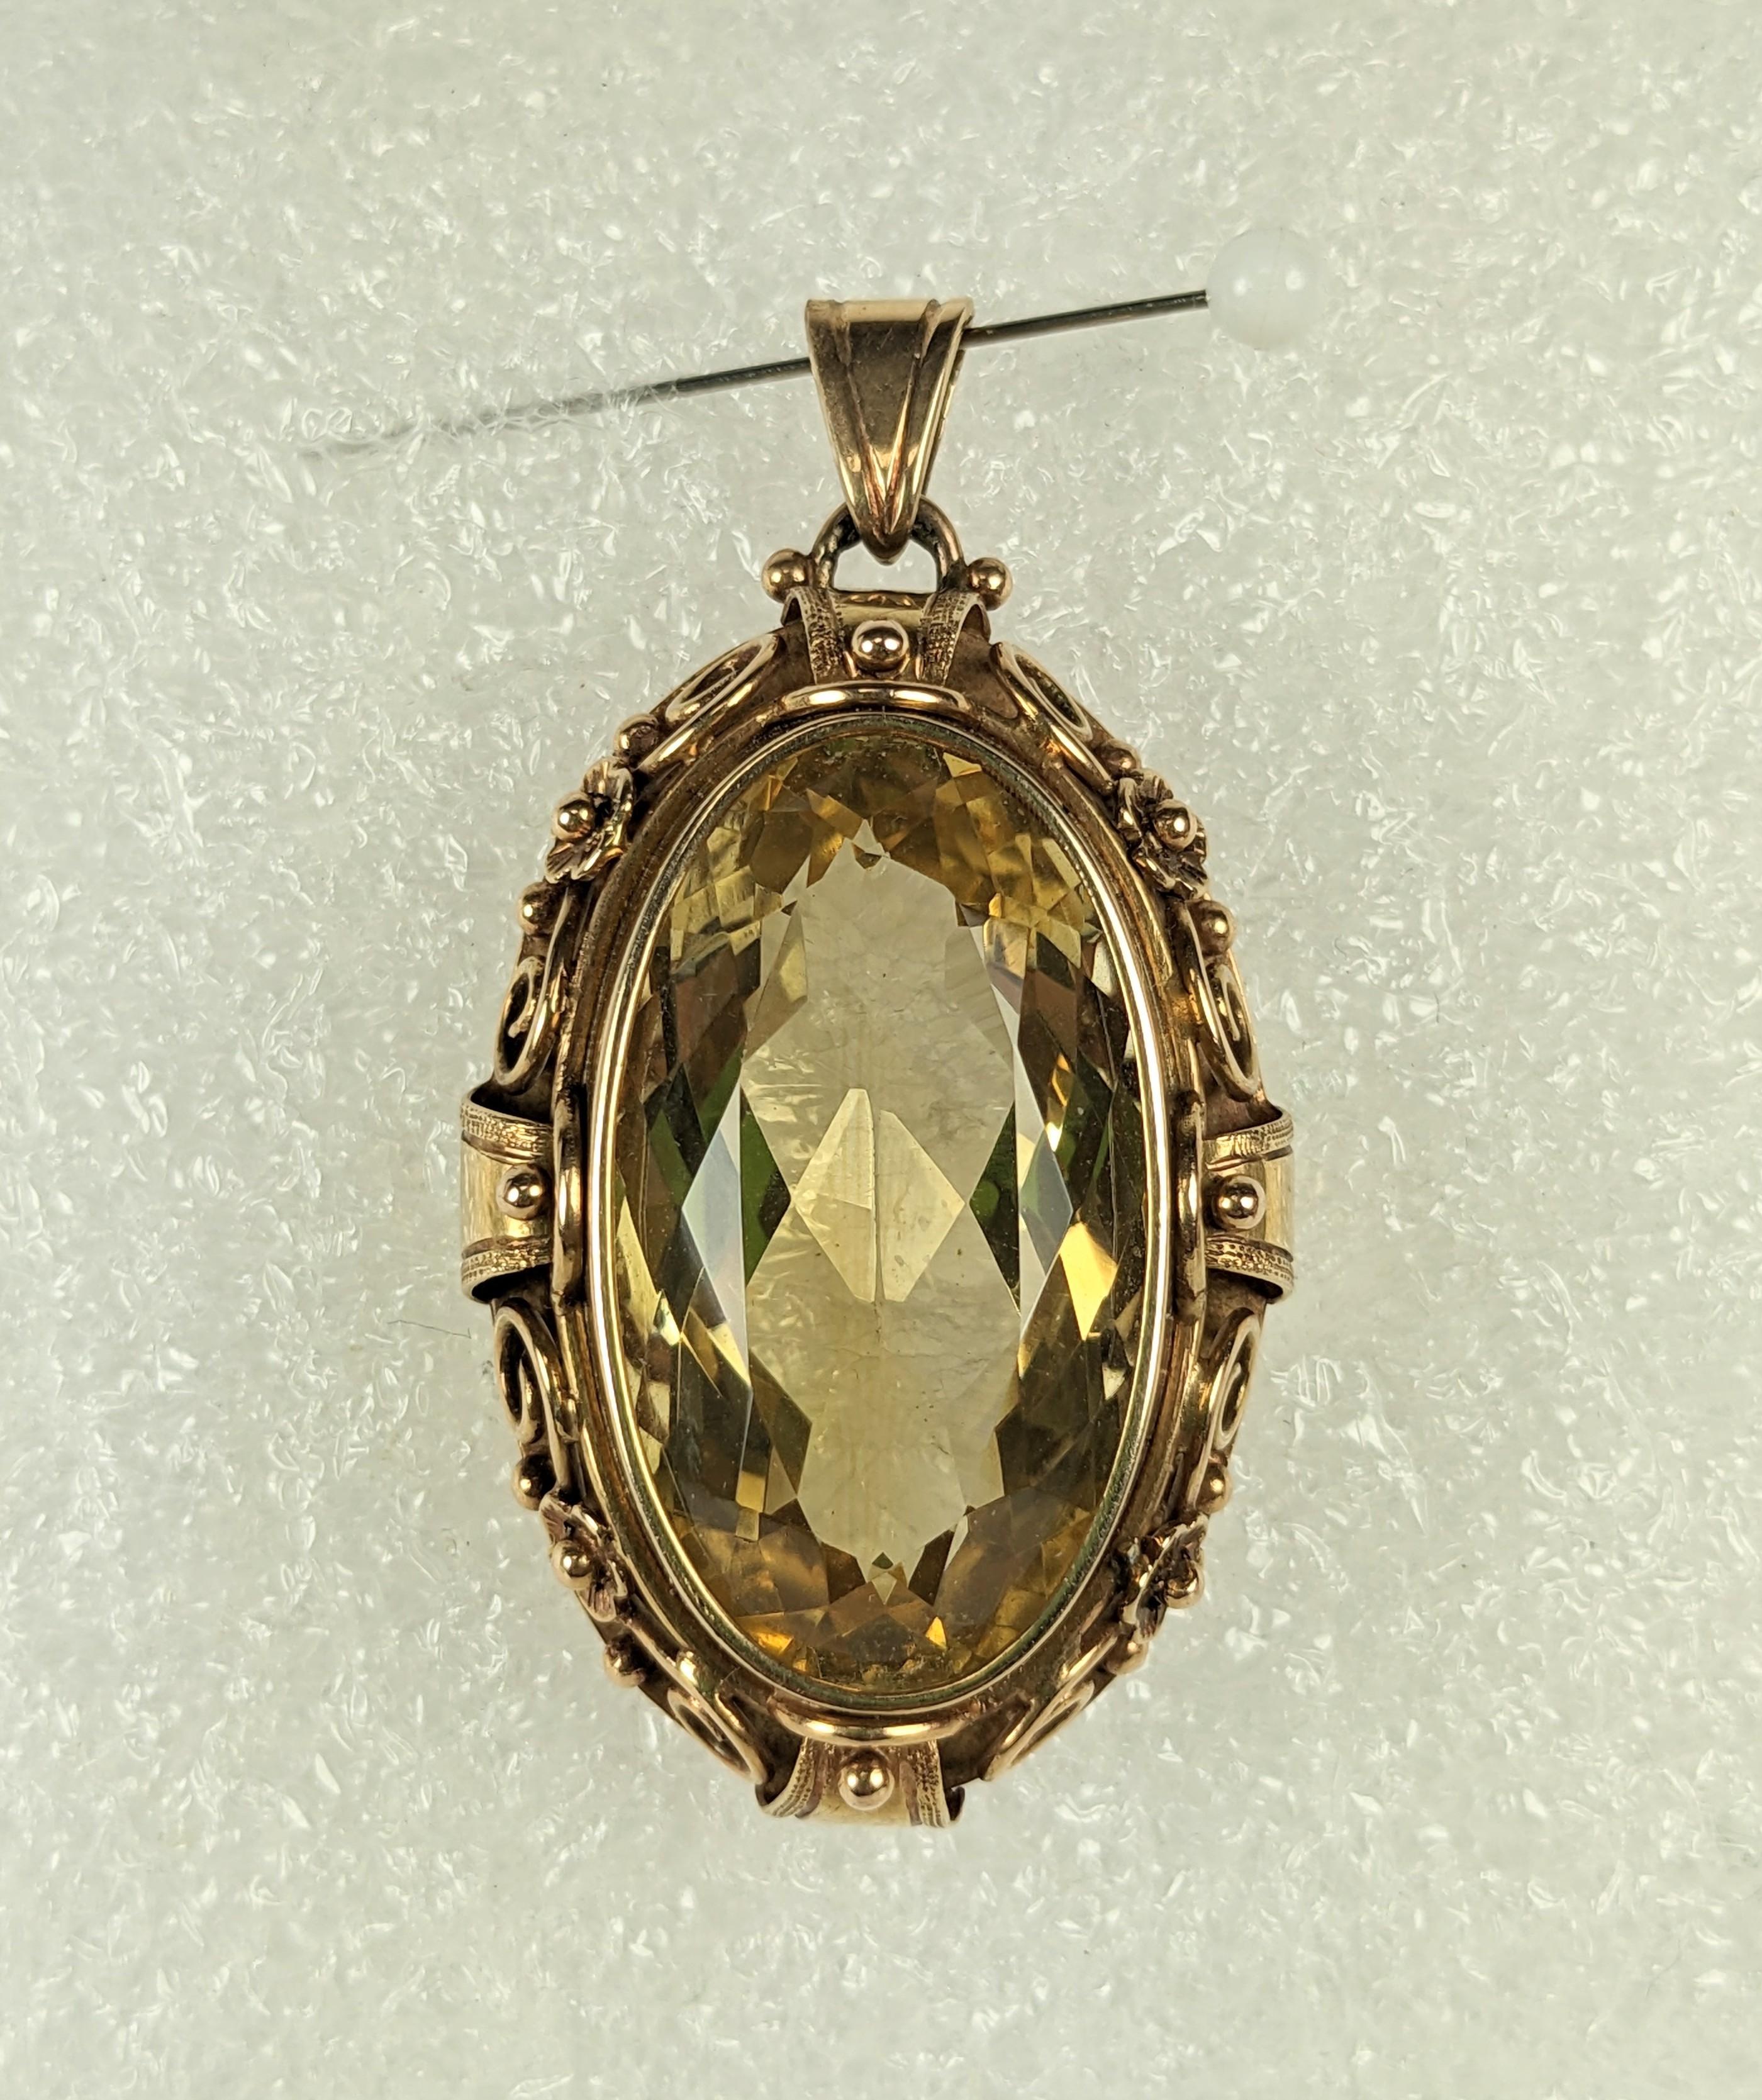 European Arts and Crafts Citrine Pendant from the early 20th Century, circa 1930.  A large and fine oval citrine (27mm x 15mm) is set in a heavy 14k pinkish gold floral Arts and Crafts setting with floral and scrollwork motifs. Marked 585 (14k).